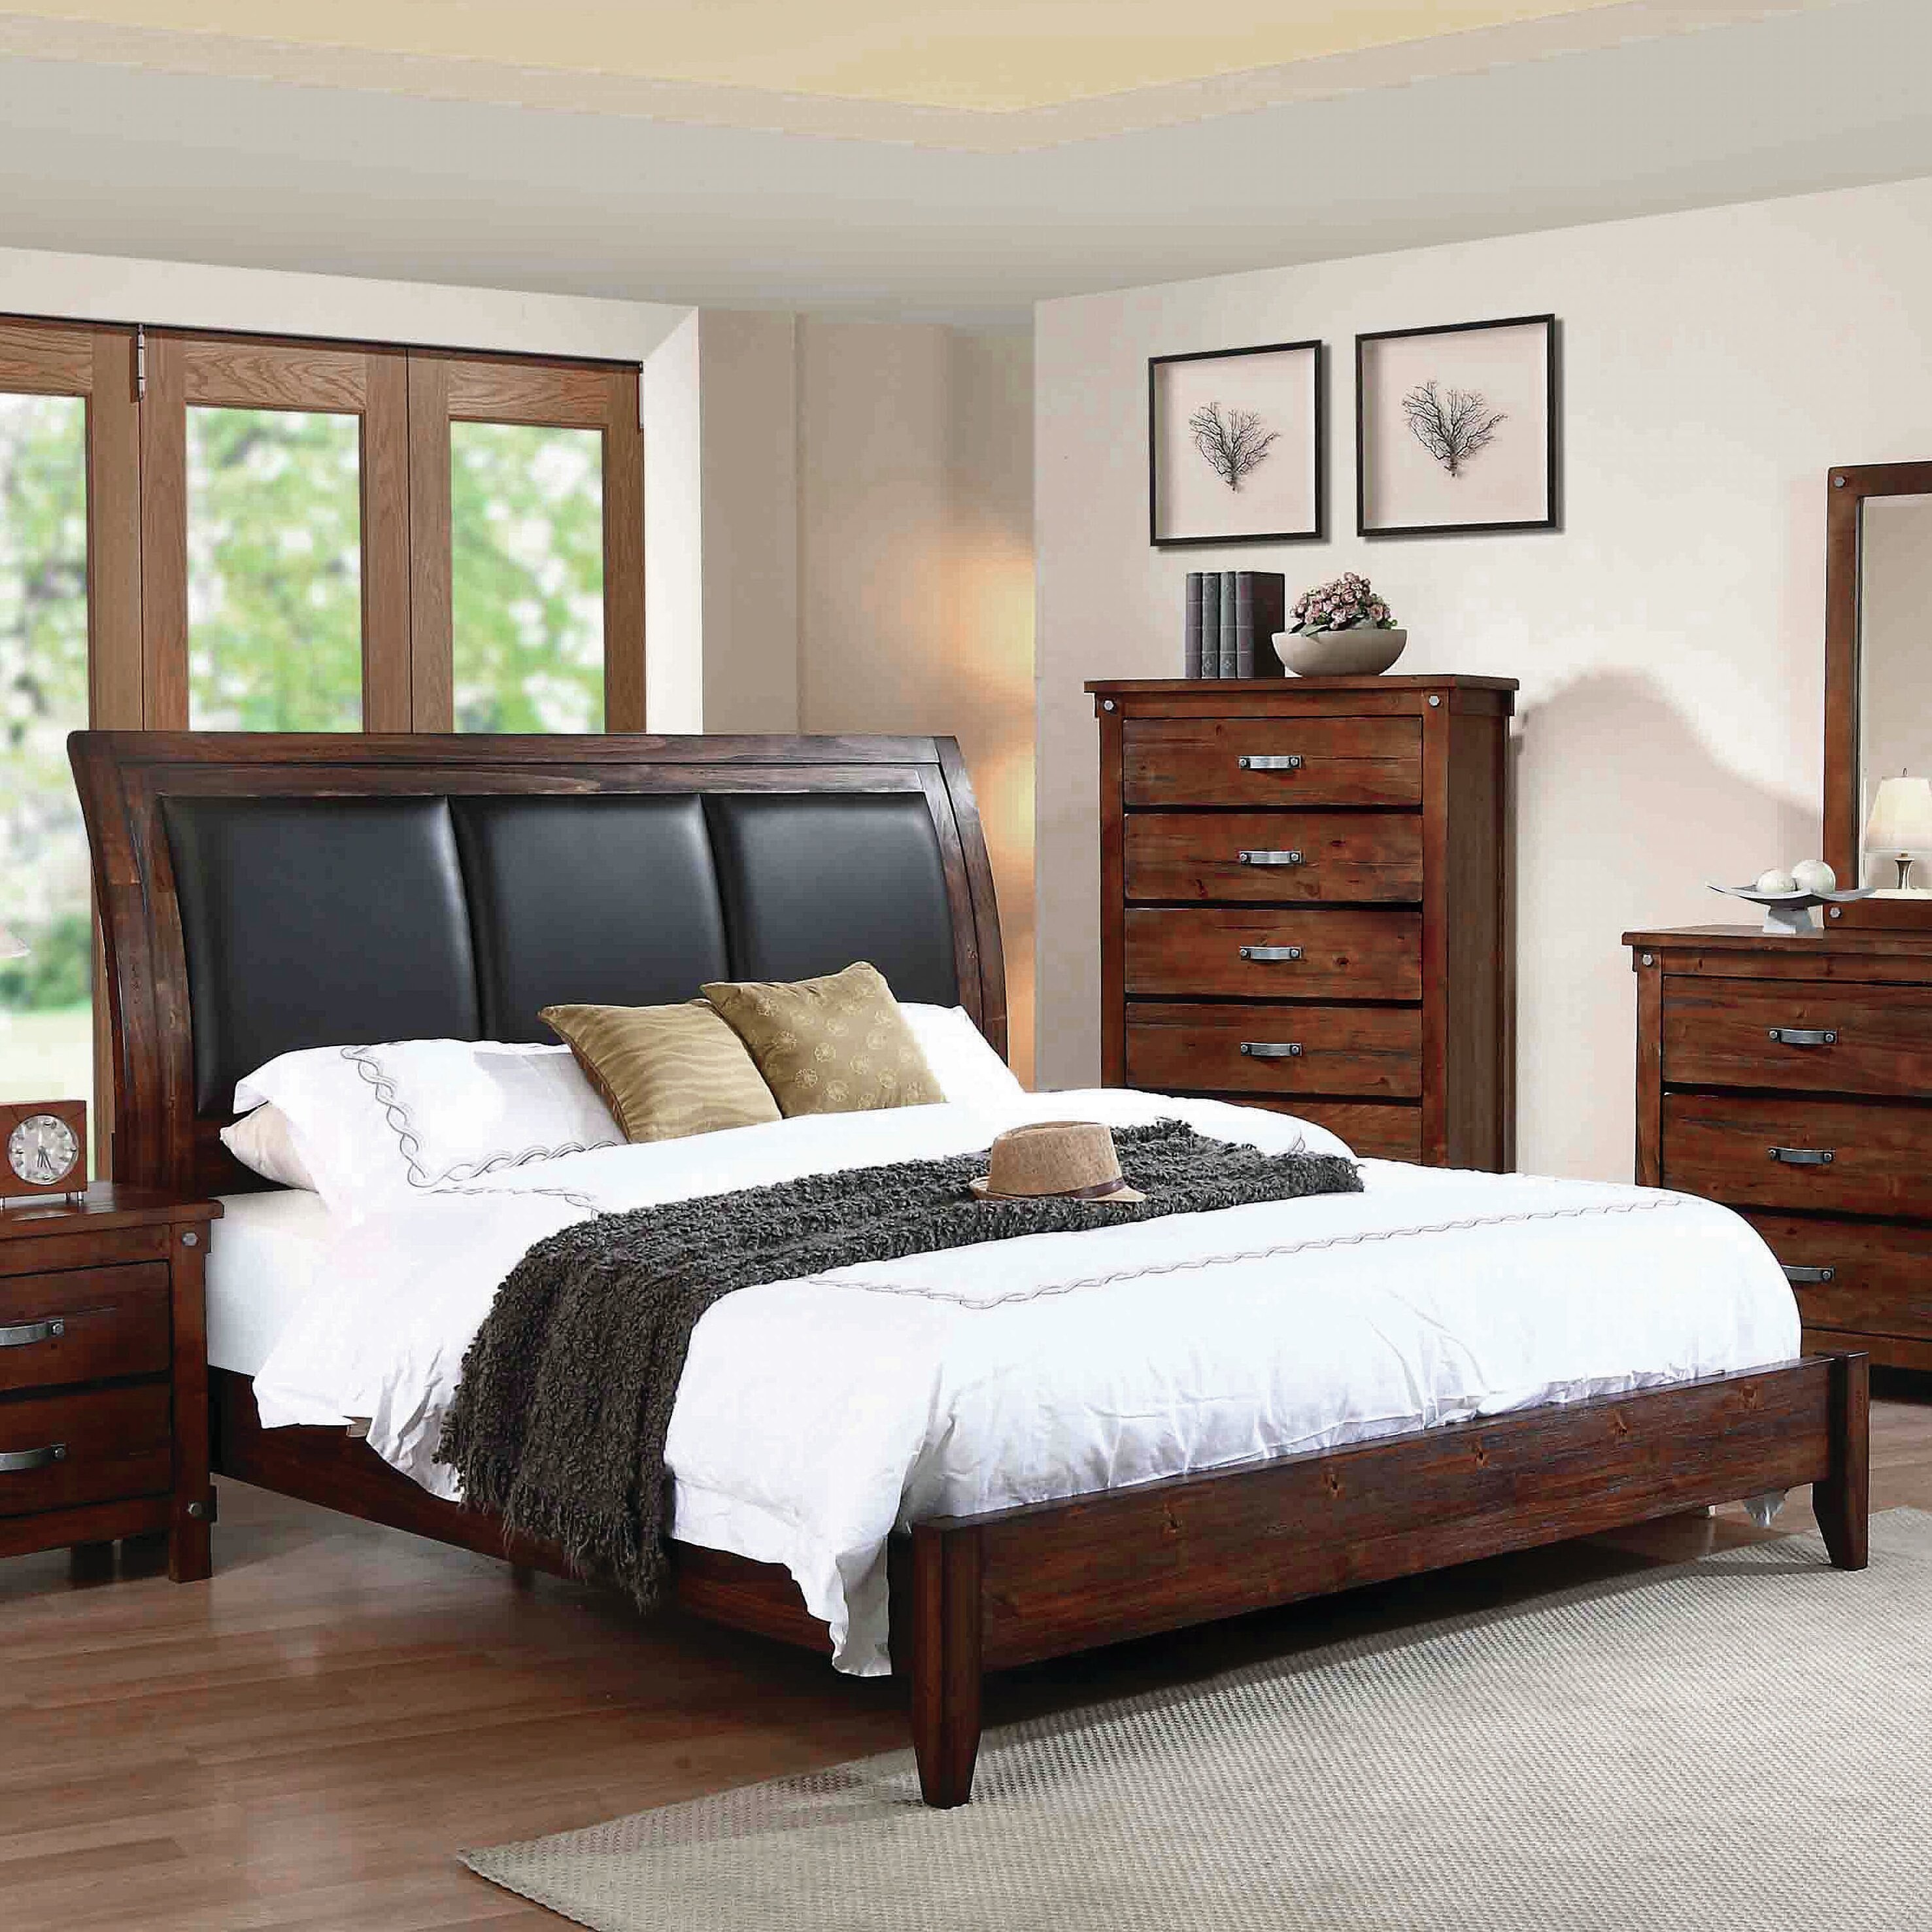 Showcase of bedroom designs with sleigh beds